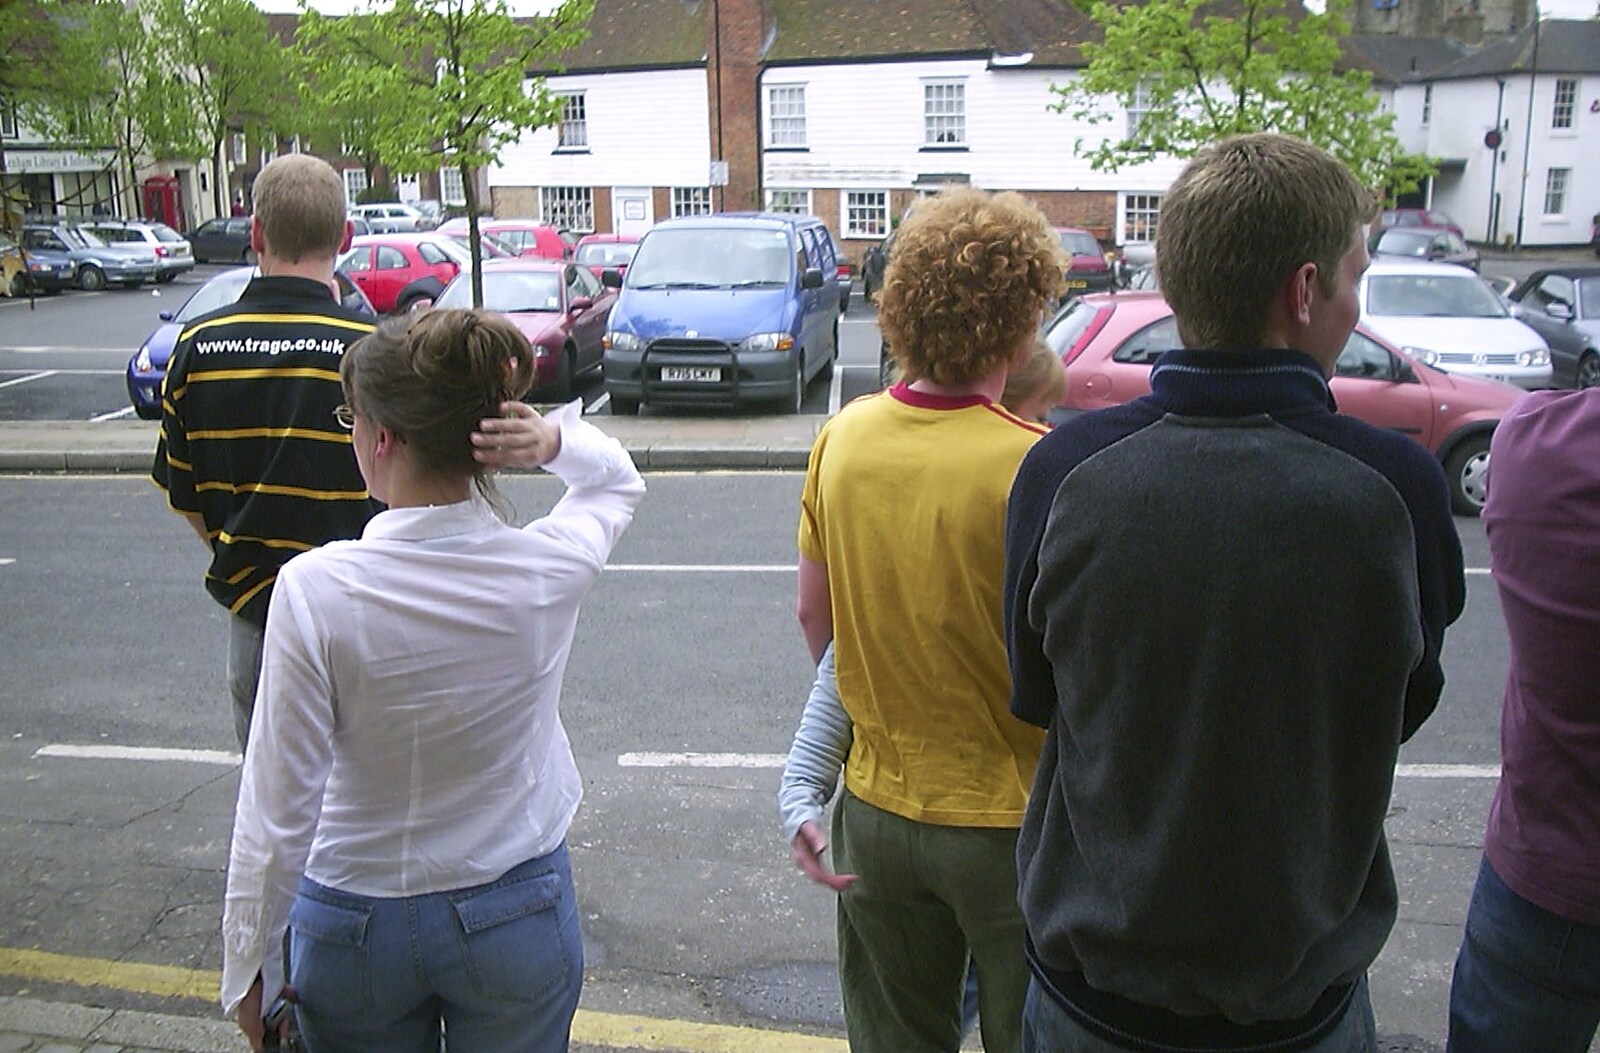 The BSCC Annual Bike Ride, Lenham, Kent - 8th May 2004: We look out over the market square/car park